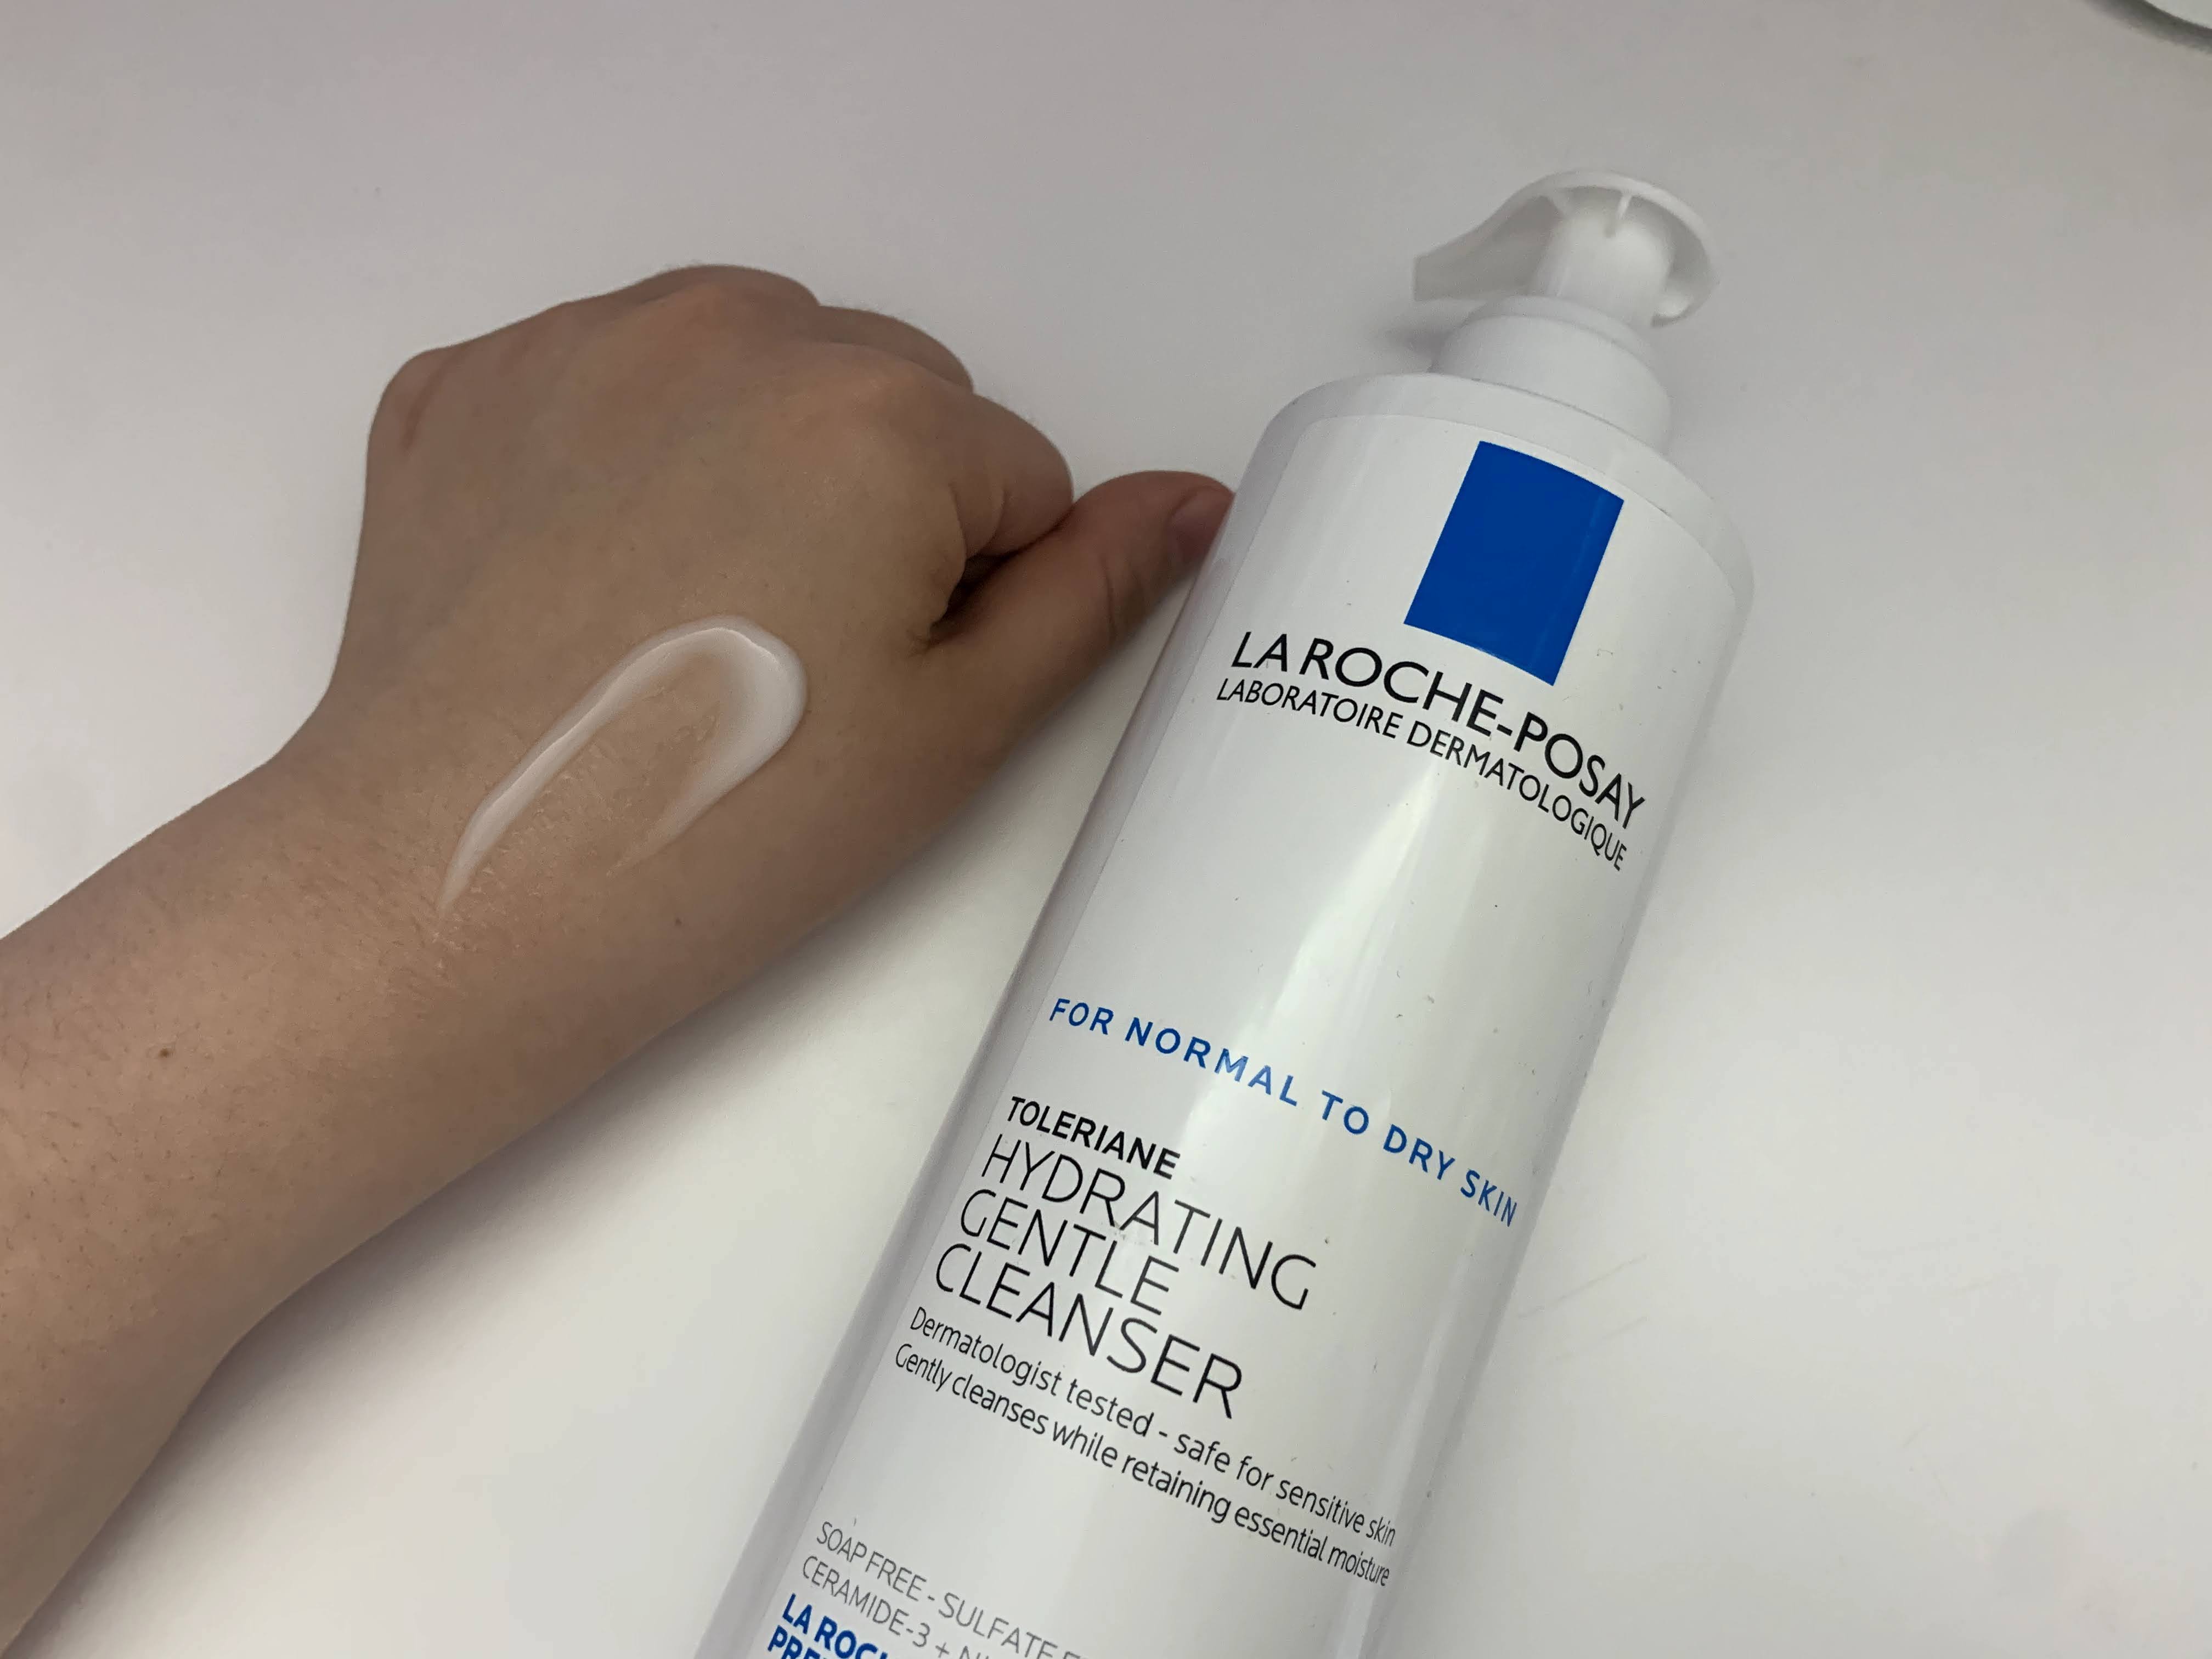 Drugstore Cleanser Review of the La Roche-Posay Hydrating Gentle Cleanser